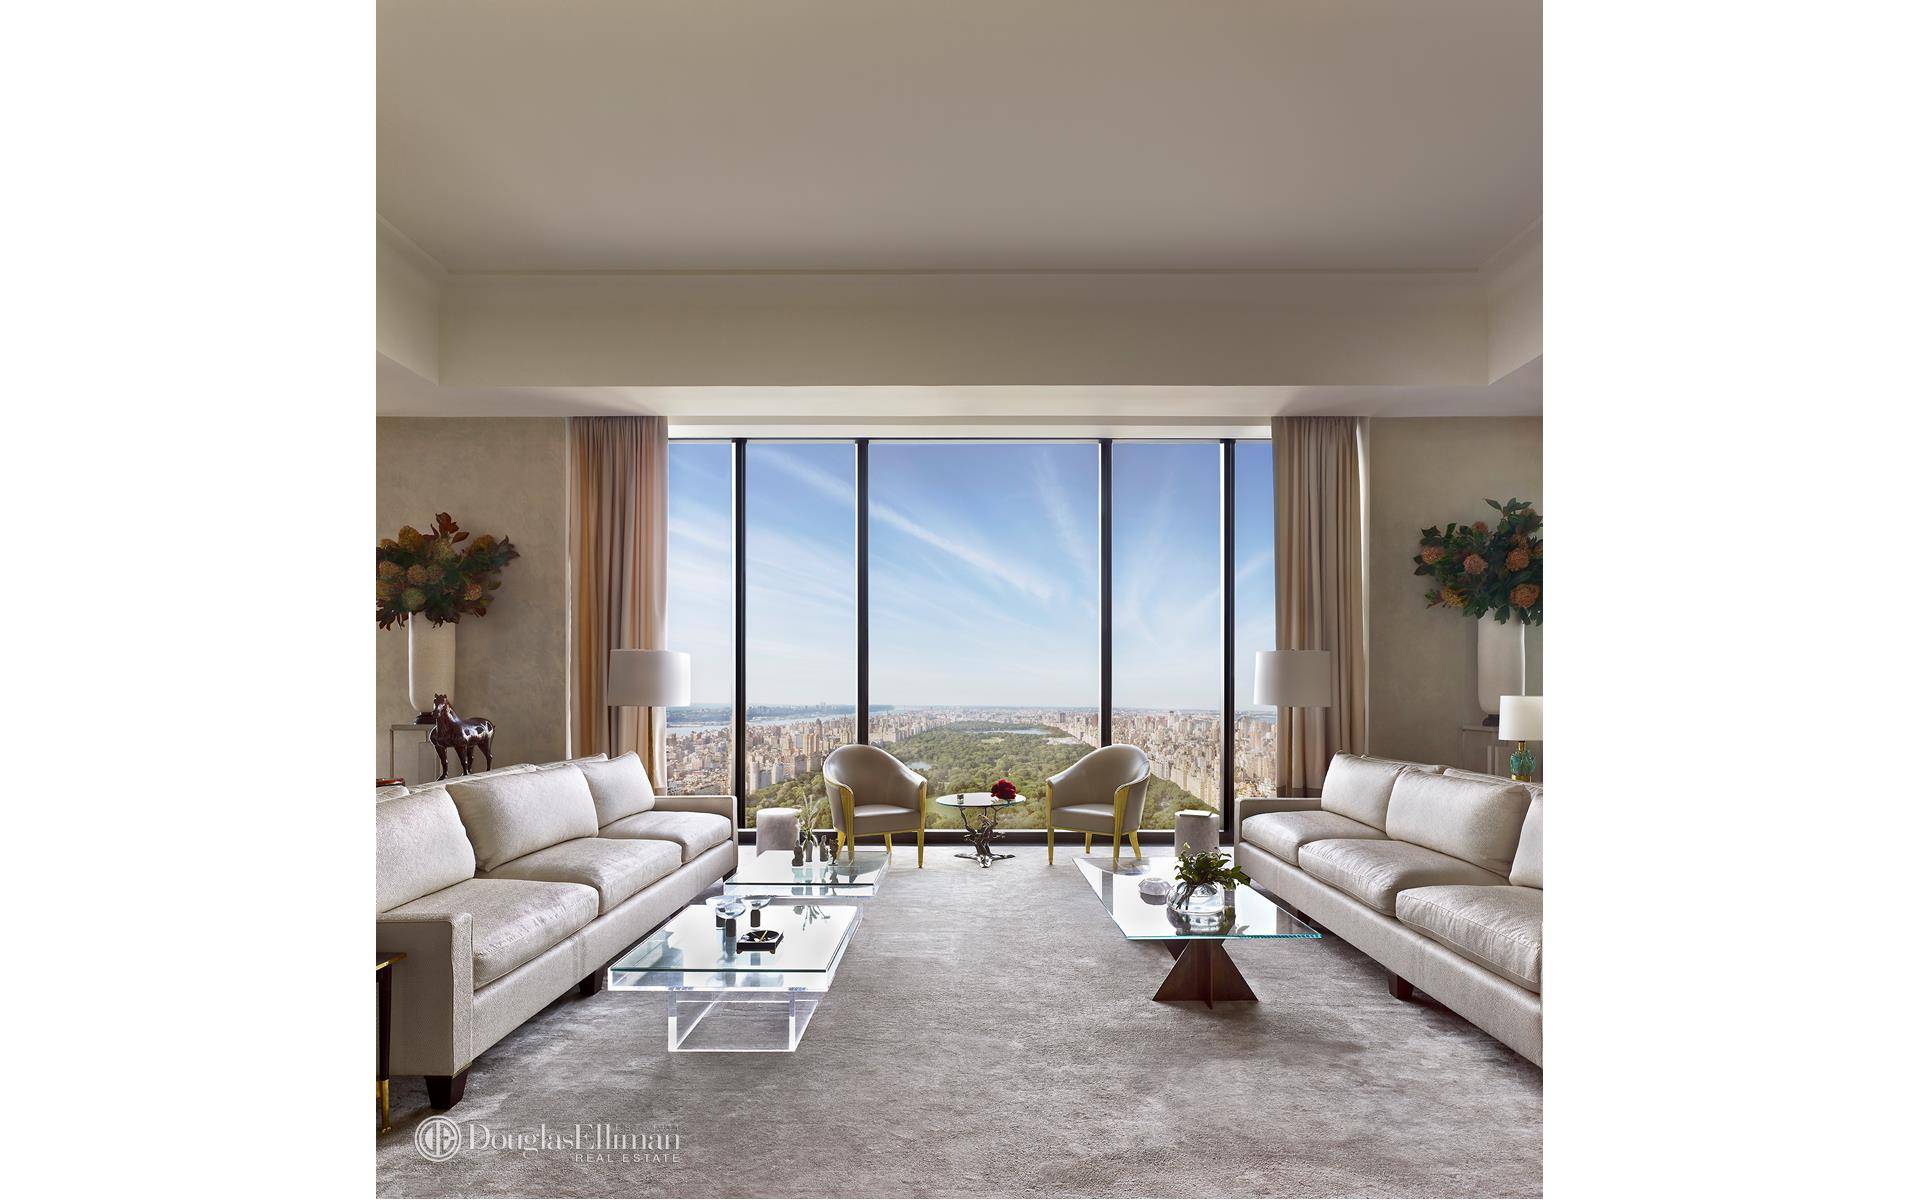 This full floor 4, 183 square foot Tower Residence with three bedrooms and three and a half bathrooms is designed for elegant living on a grand scale.